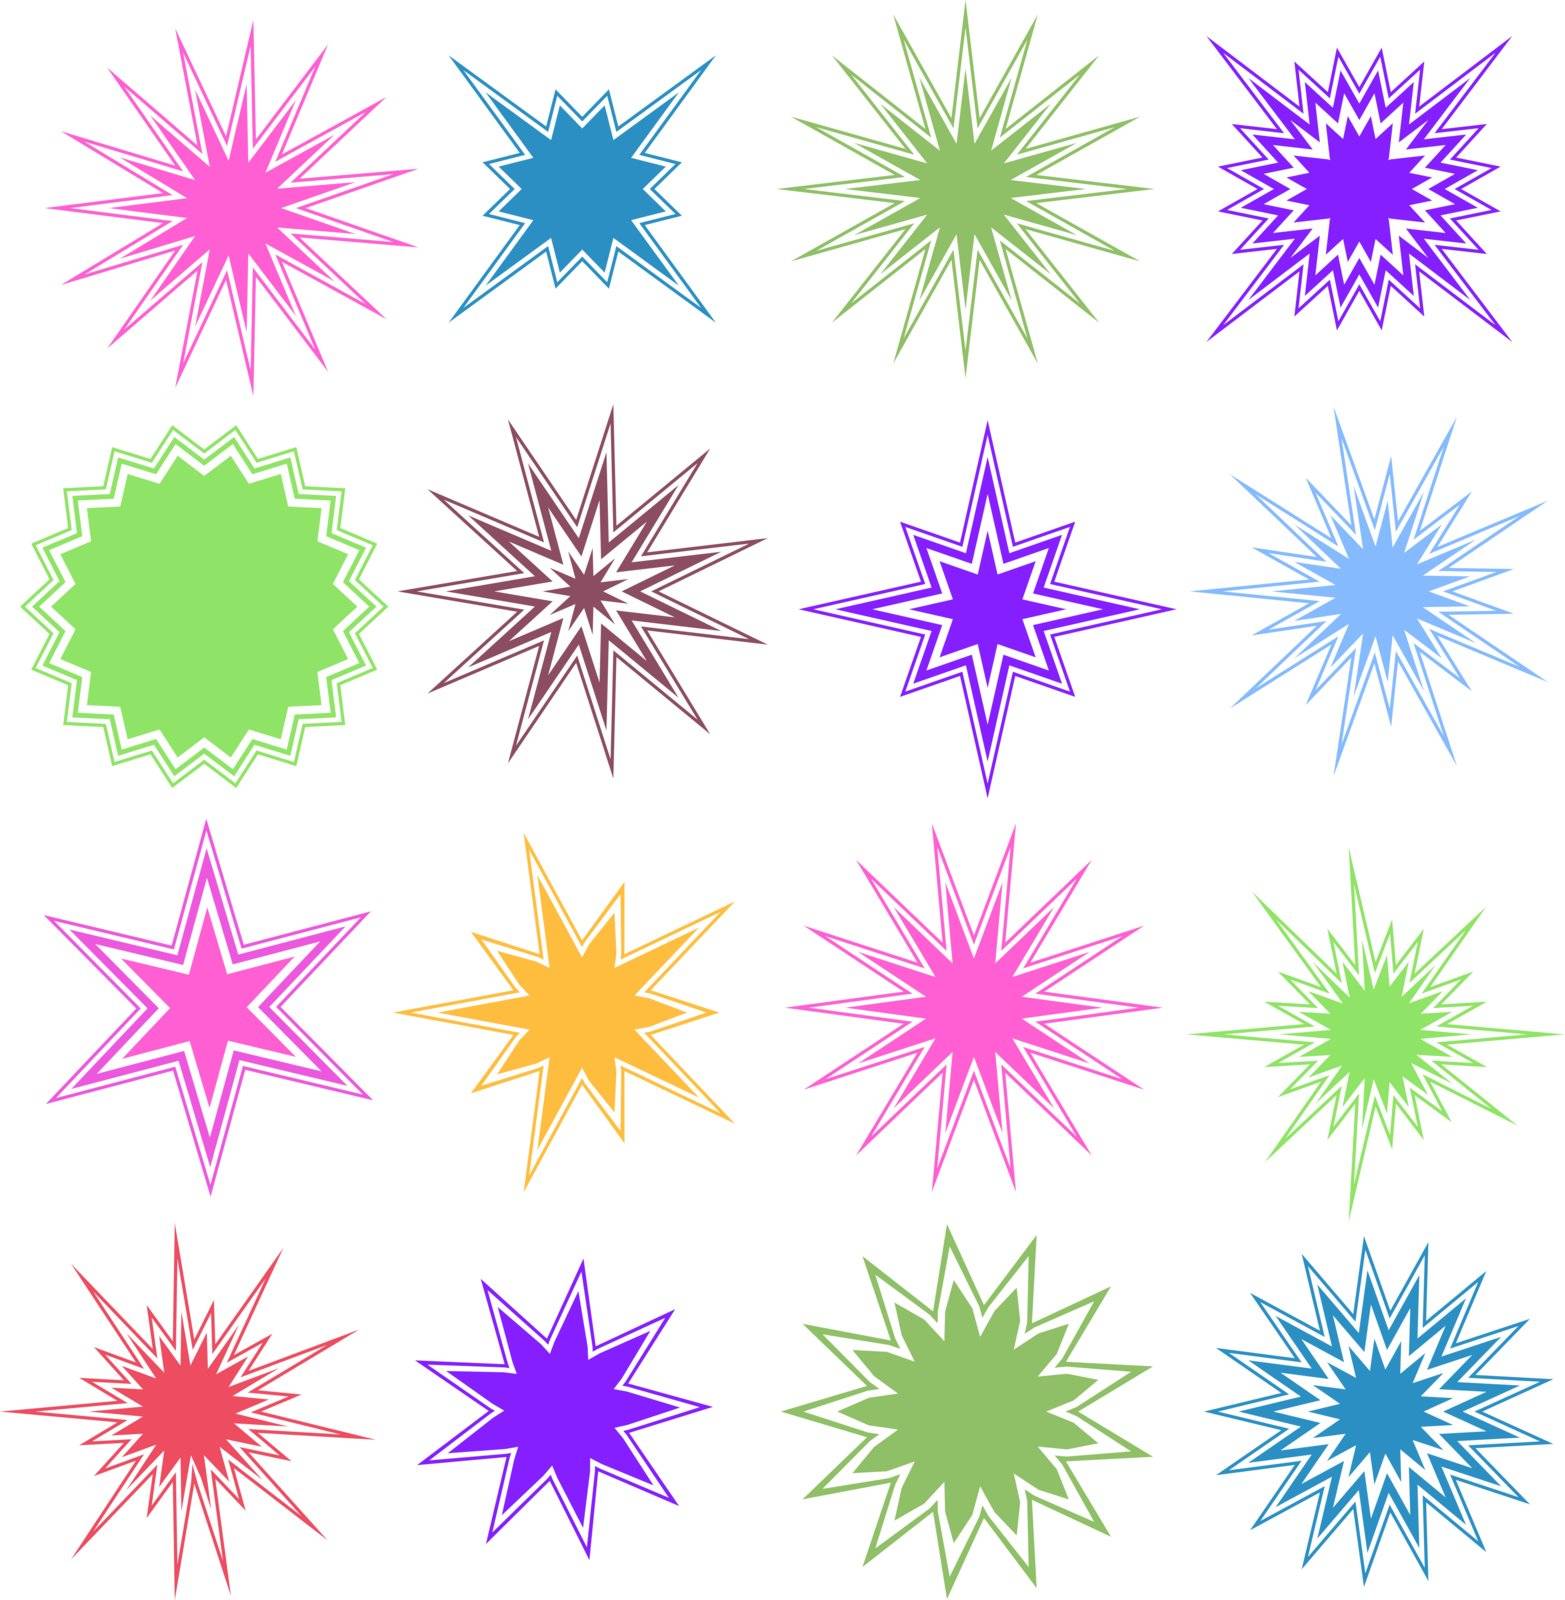 Set of 16 different starburst designs in various colors.